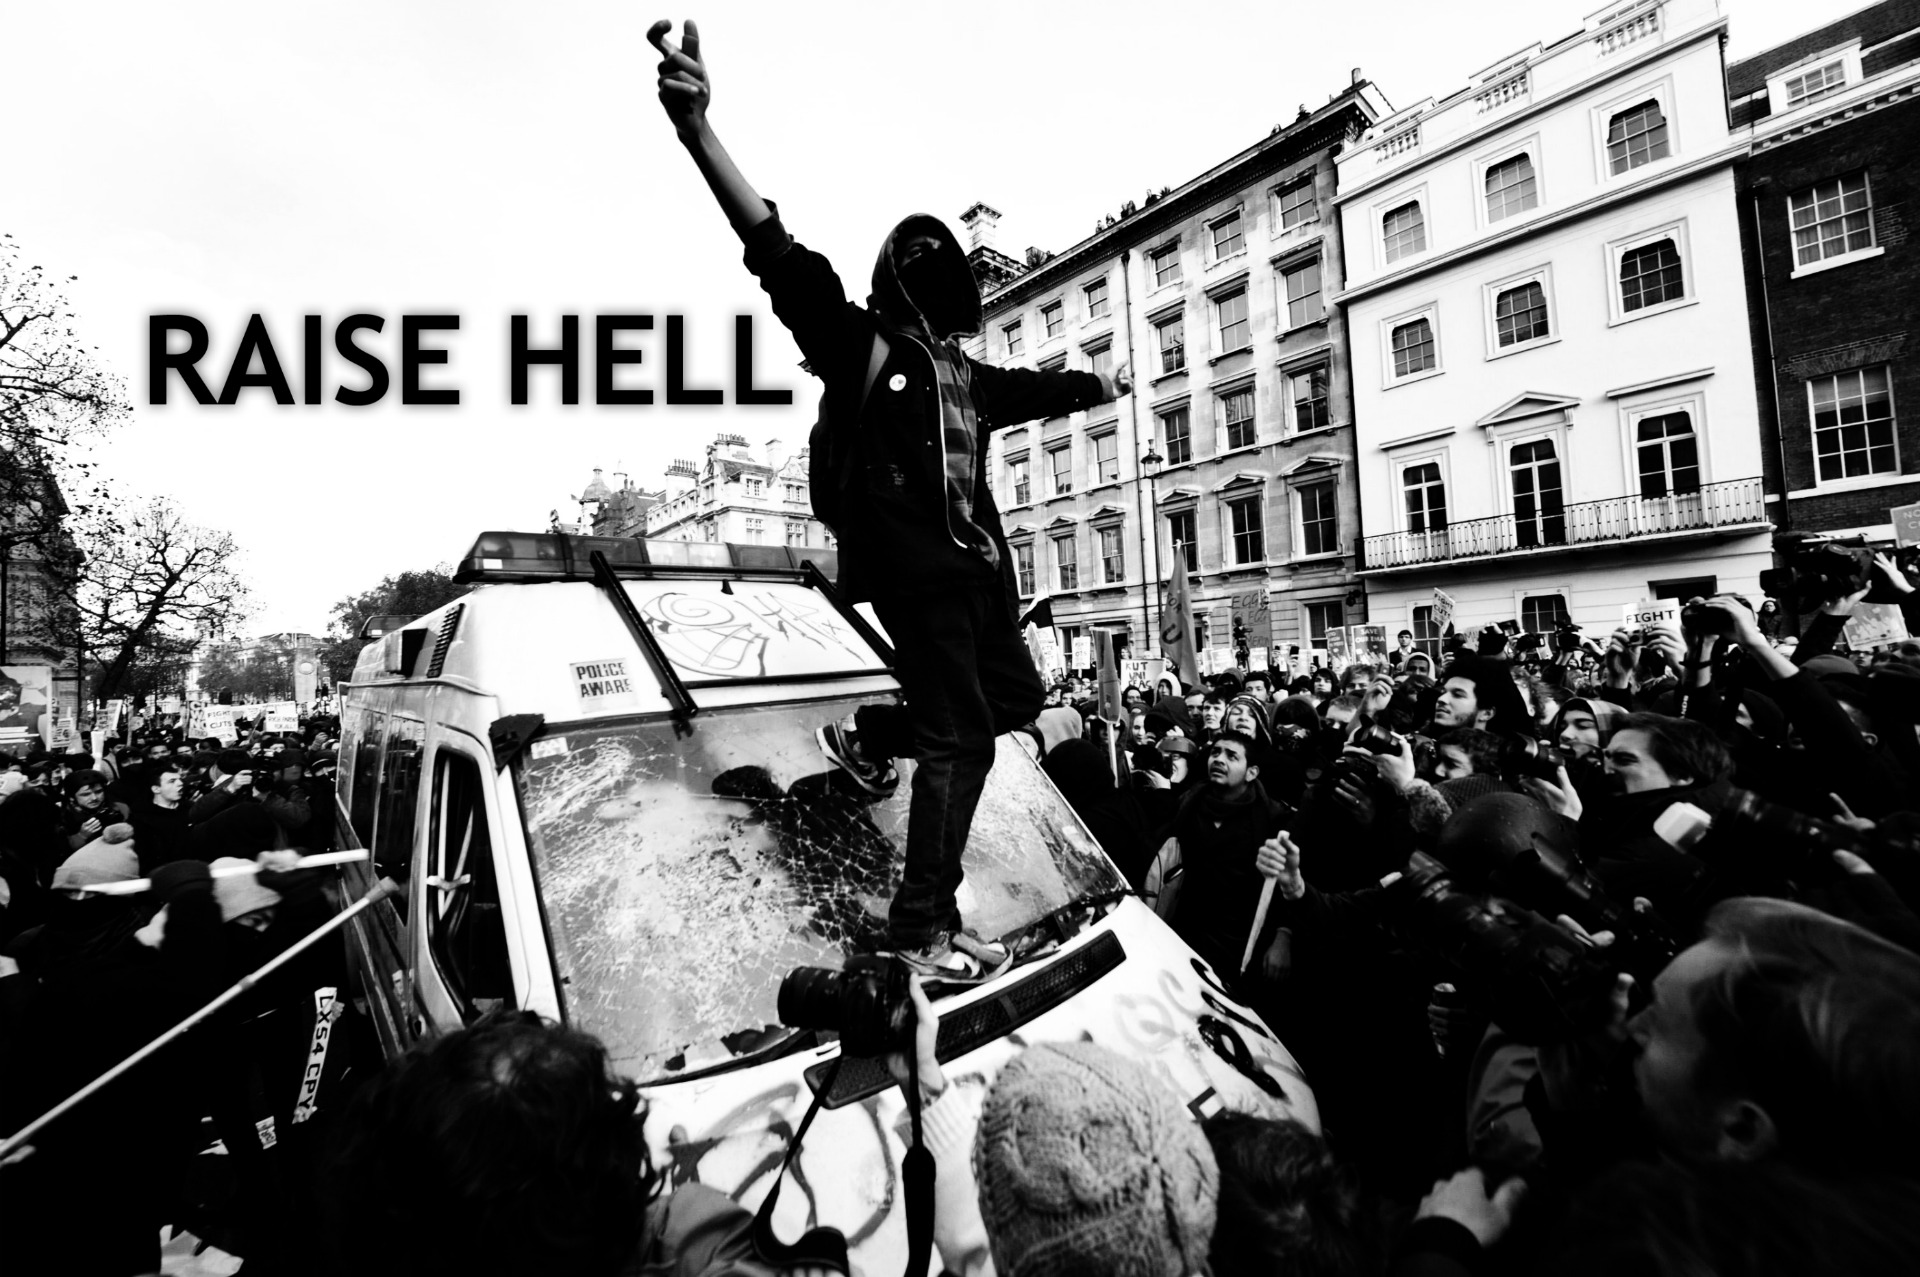 anarchy wallpaper,crowd,black and white,monochrome,rebellion,photography